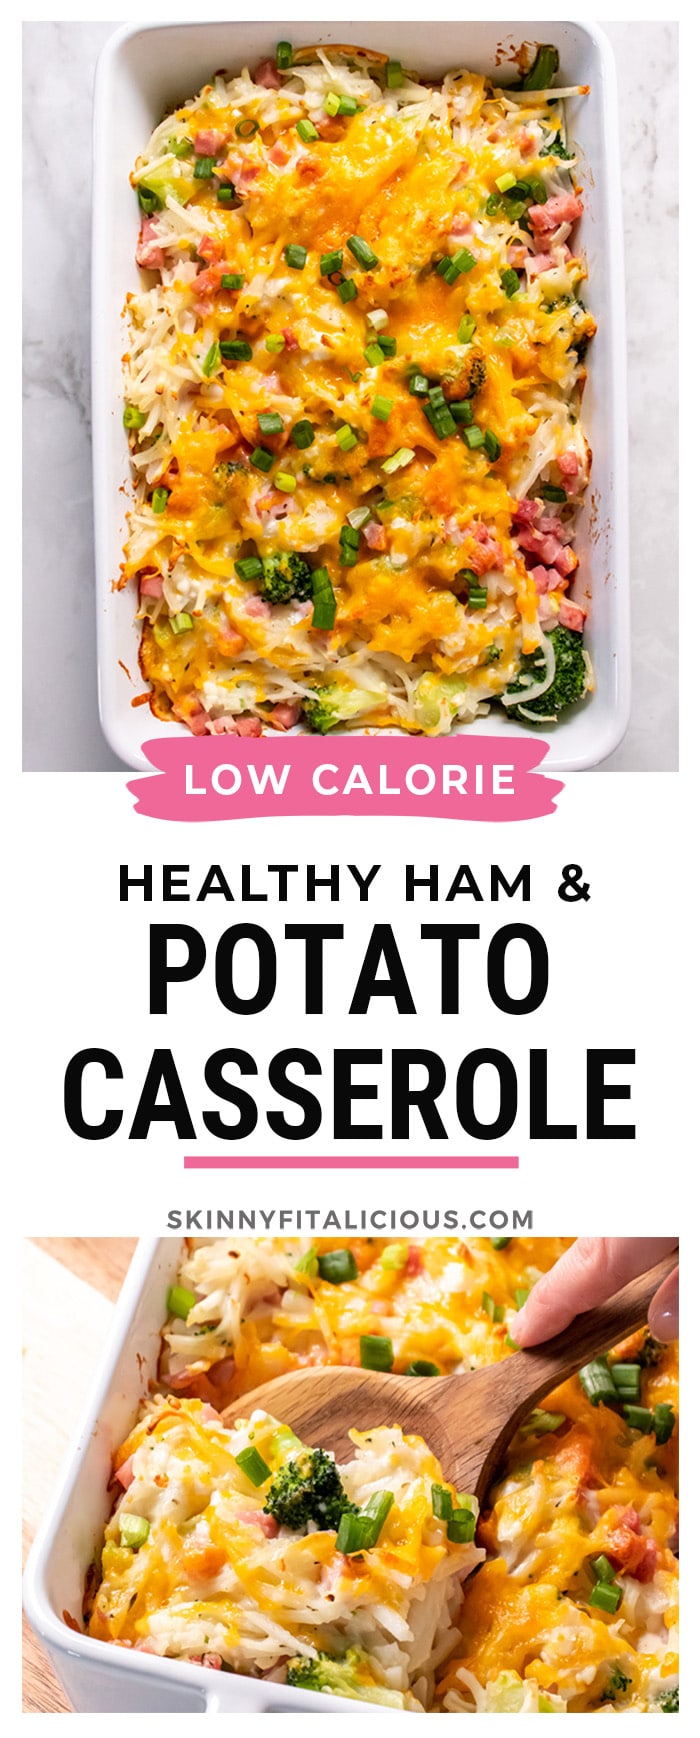 Healthy Ham and Potato Casserole is a low calorie casserole made with frozen shredded potatoes for ease loaded with broccoli and topped with a creamy cheese sauce! 